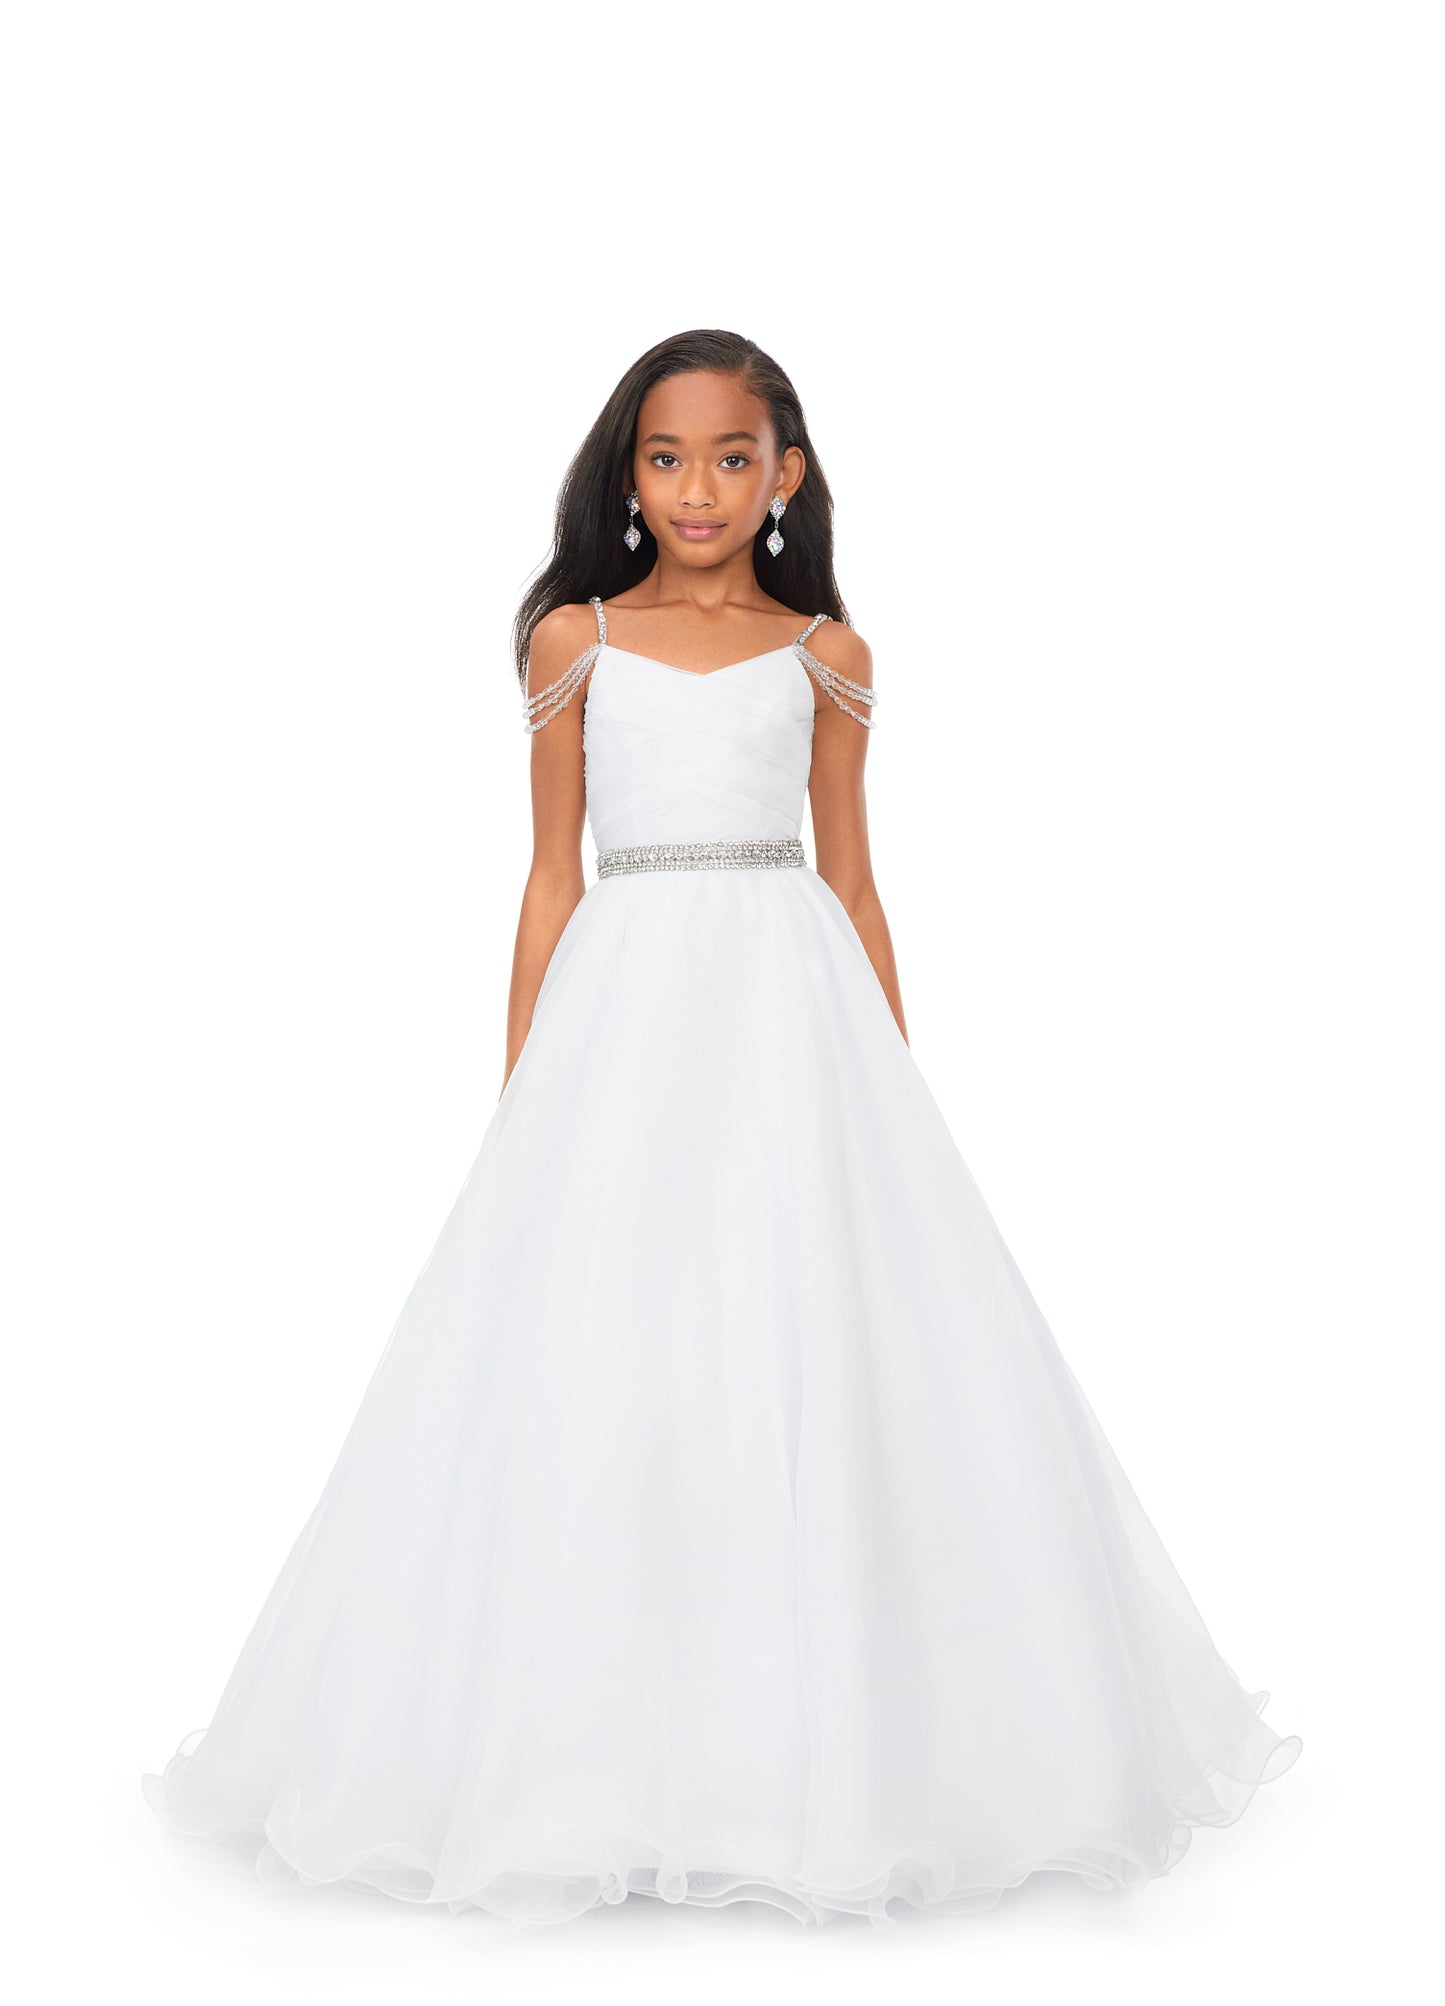 Ashley Lauren Kids 8170 Girls Organza Pageant Dress Ball Gown with Beaded Details Ivory